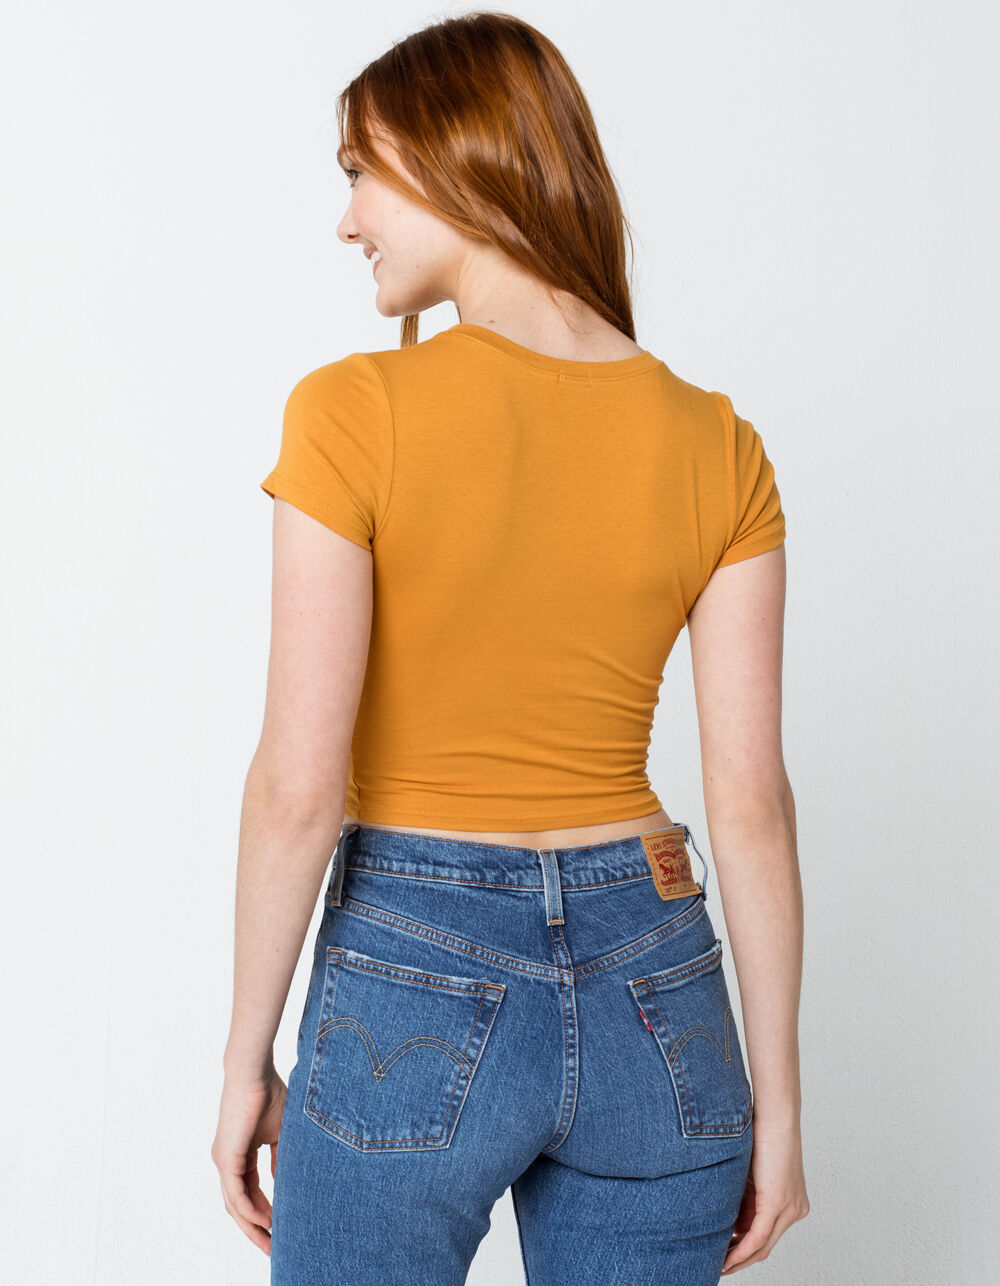 BOZZOLO Crew Neck Womens Mustard Crop Tee image number 2